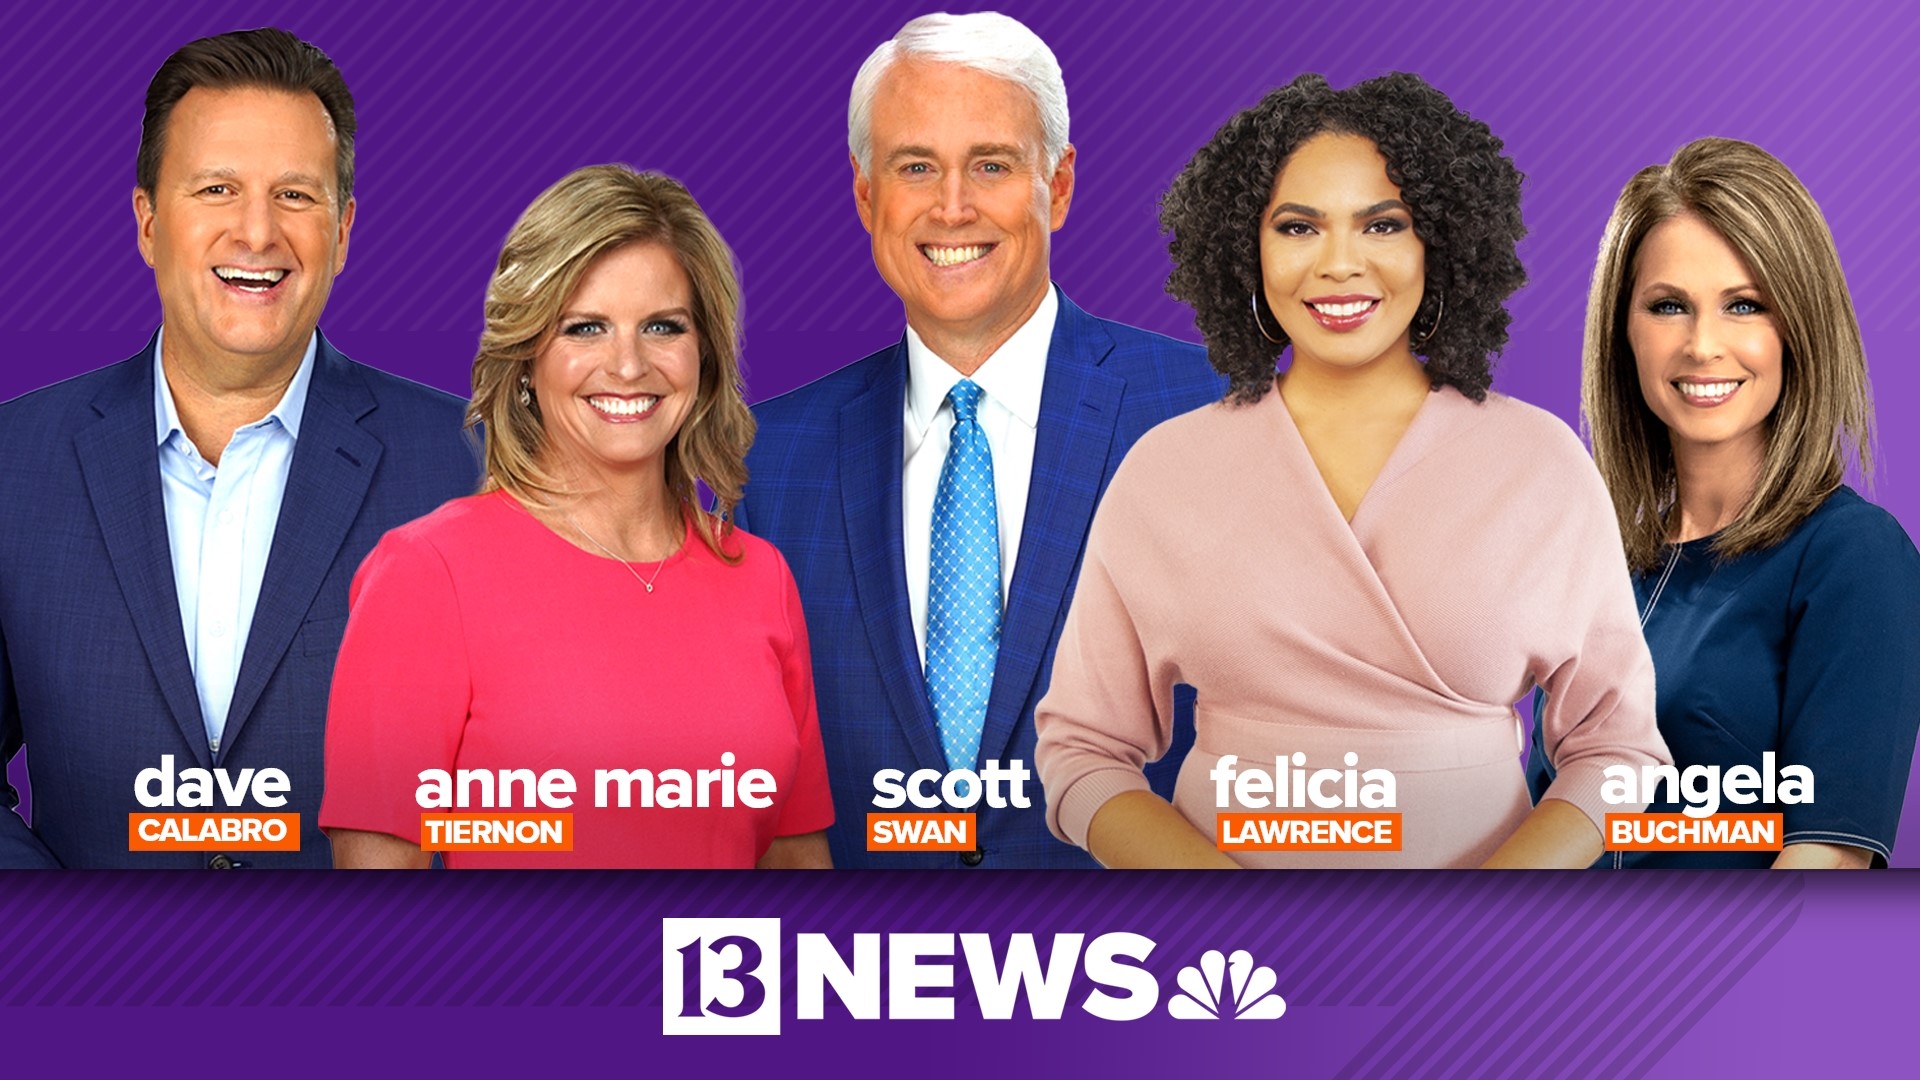 13News covers the latest news developing in Central Indiana and across the country, plus breaking news, weather and investigative reporting affecting Hoosiers.